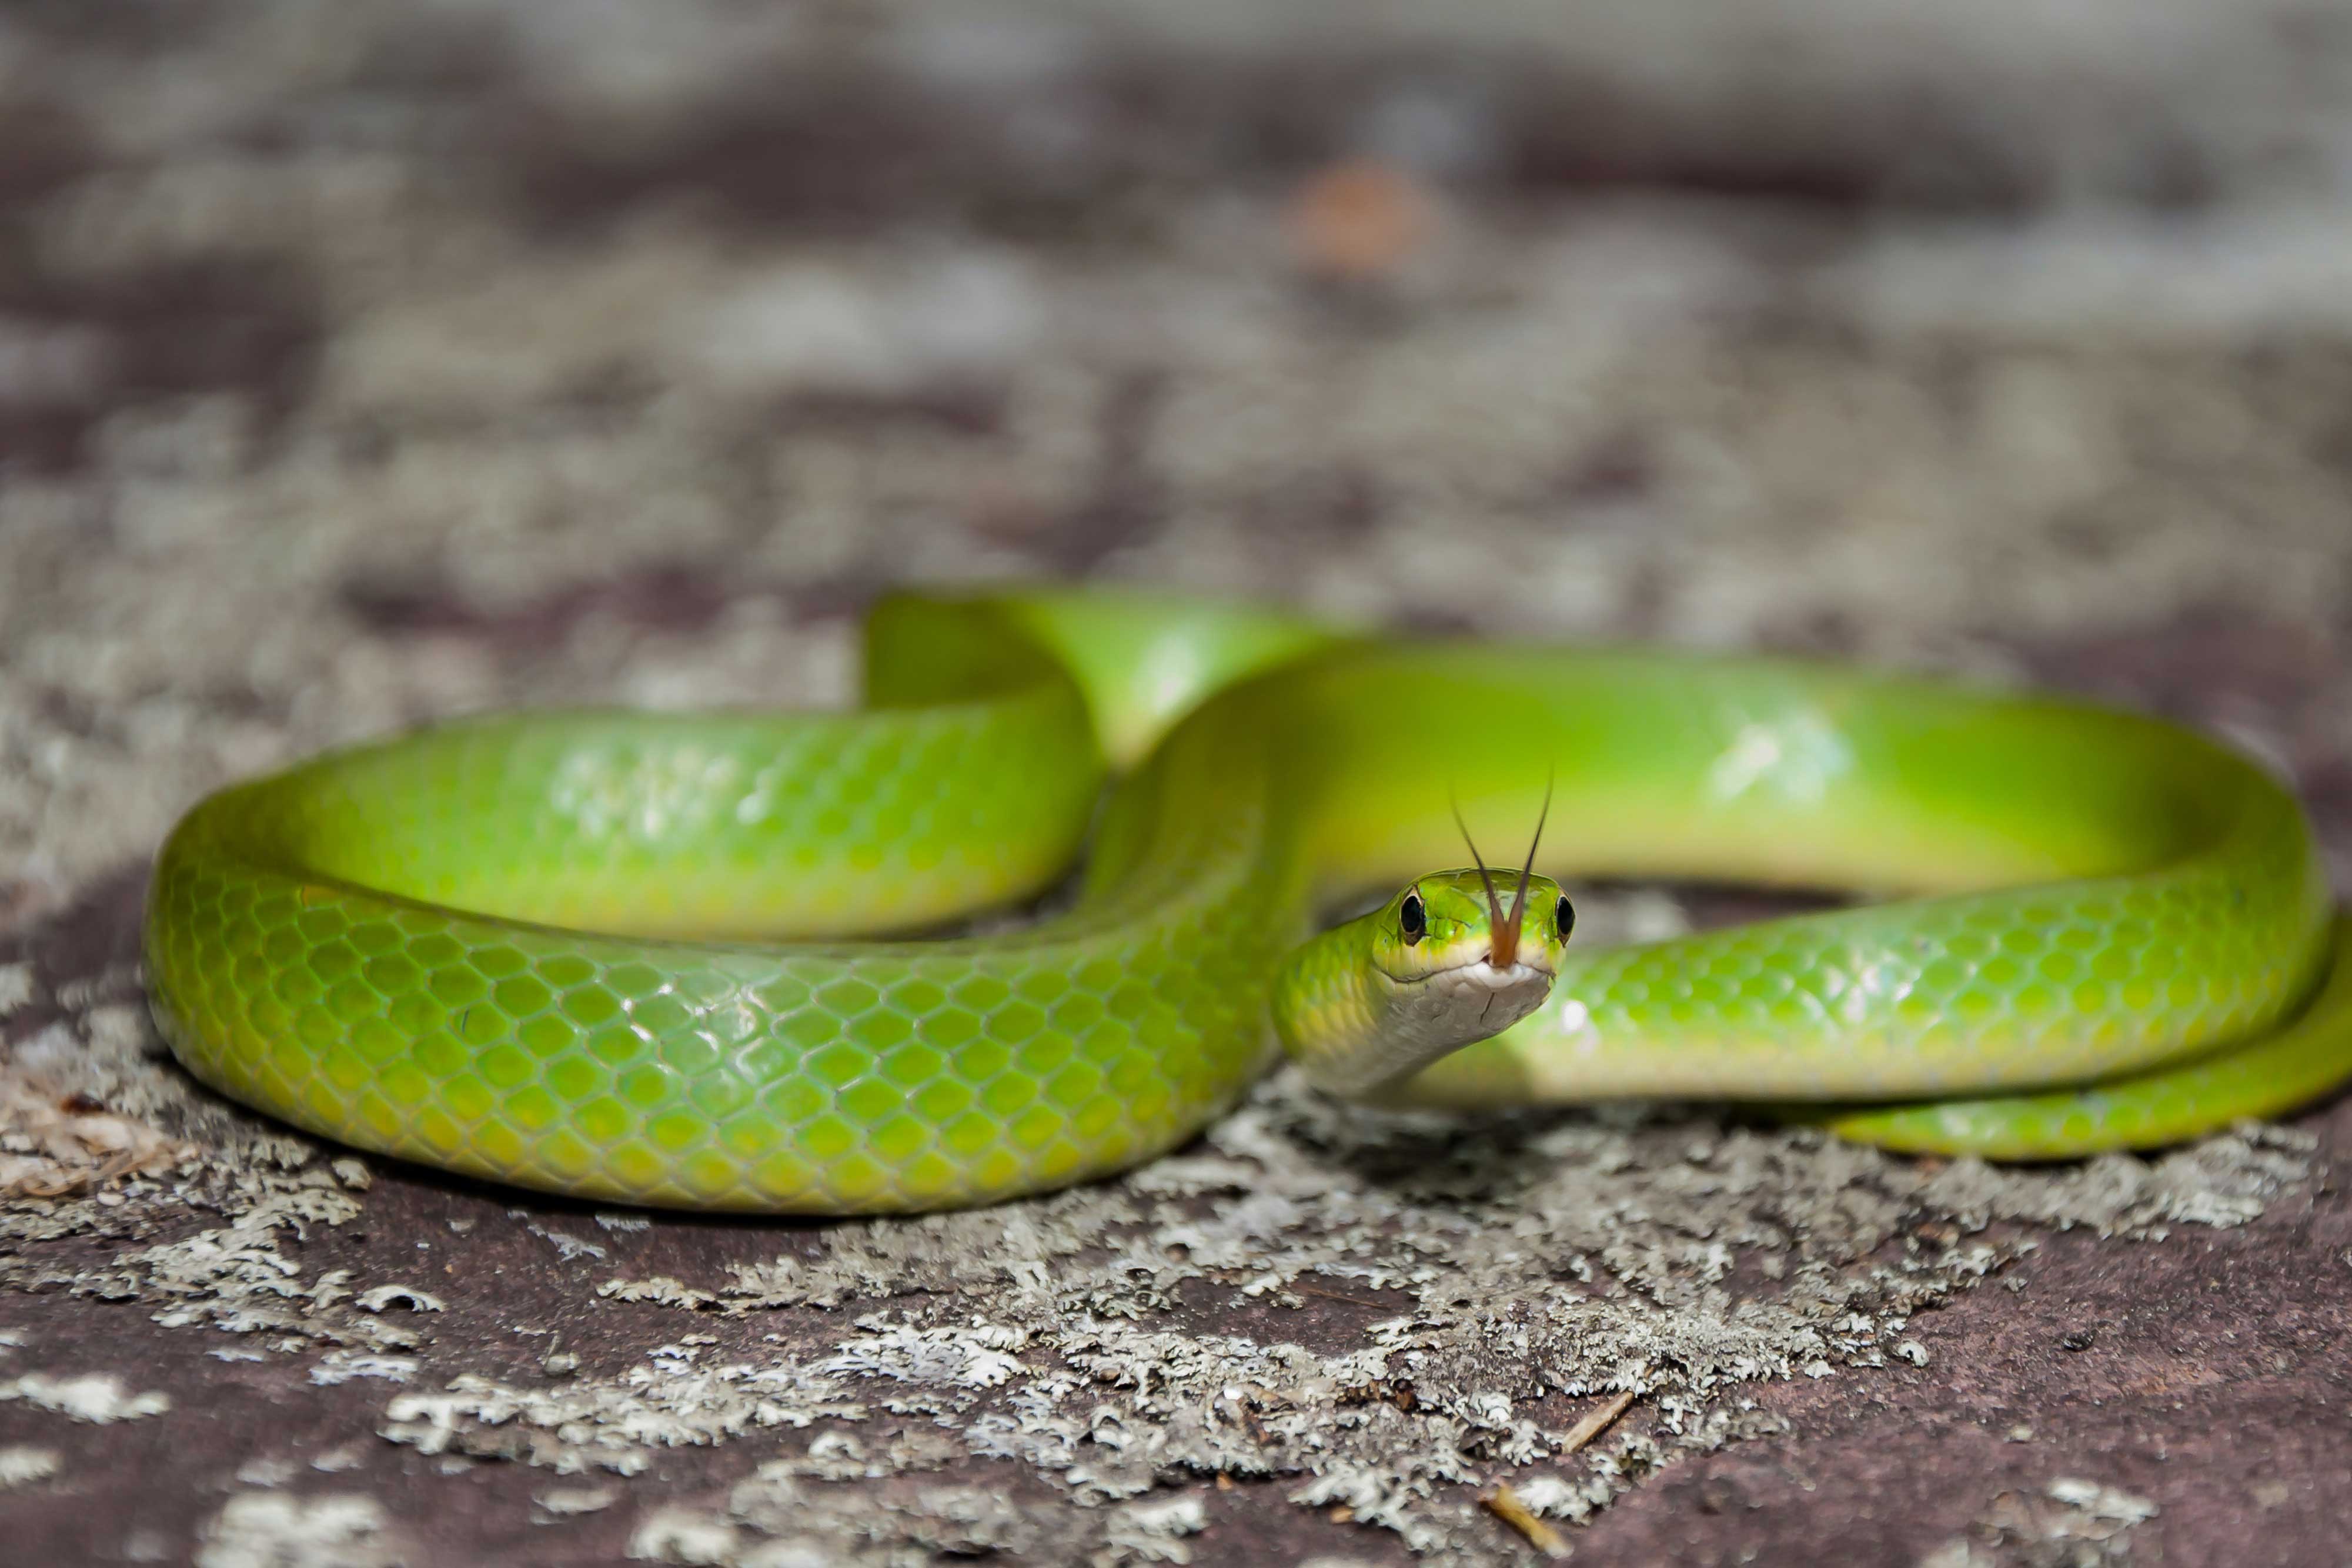 A smooth green snake on the ground.